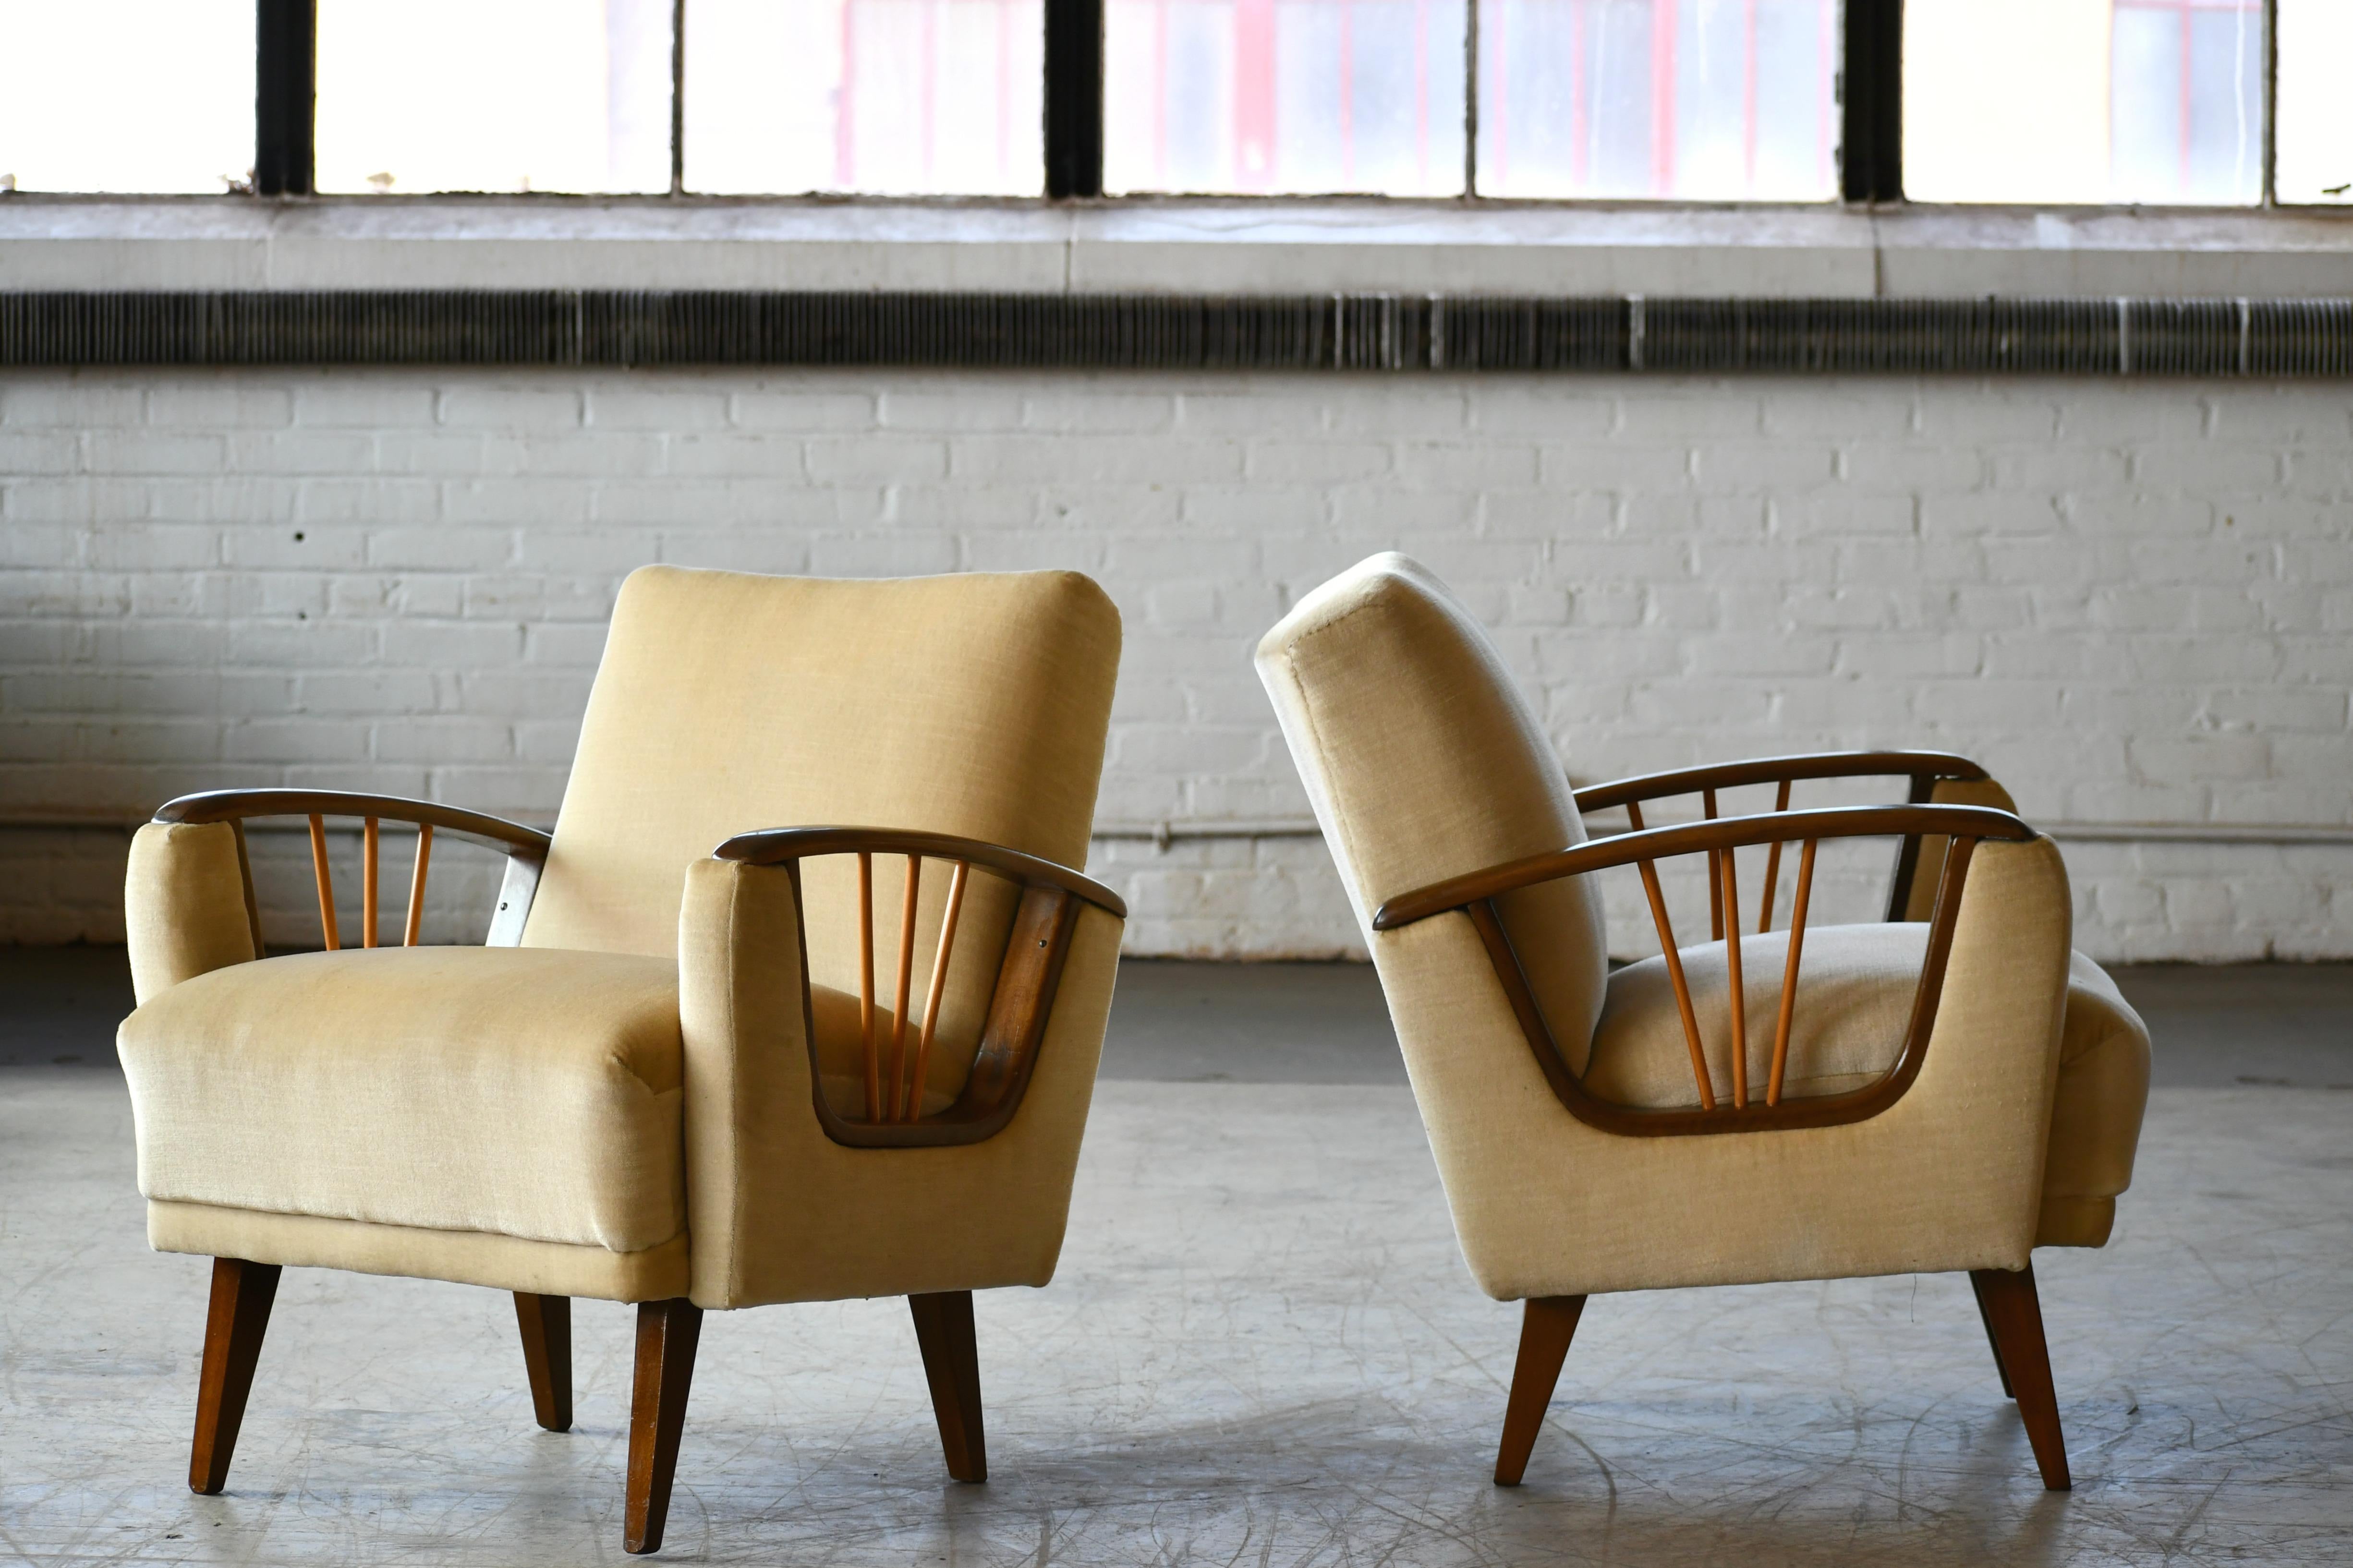 Charming pair of lounge chairs in the style of Paolo Buffa. The rectilinear armrests were much of a hallmark of Paolo Buffa and while he would probably have designed a much deeper chair these two are very interesting. We found them in Denmark but we